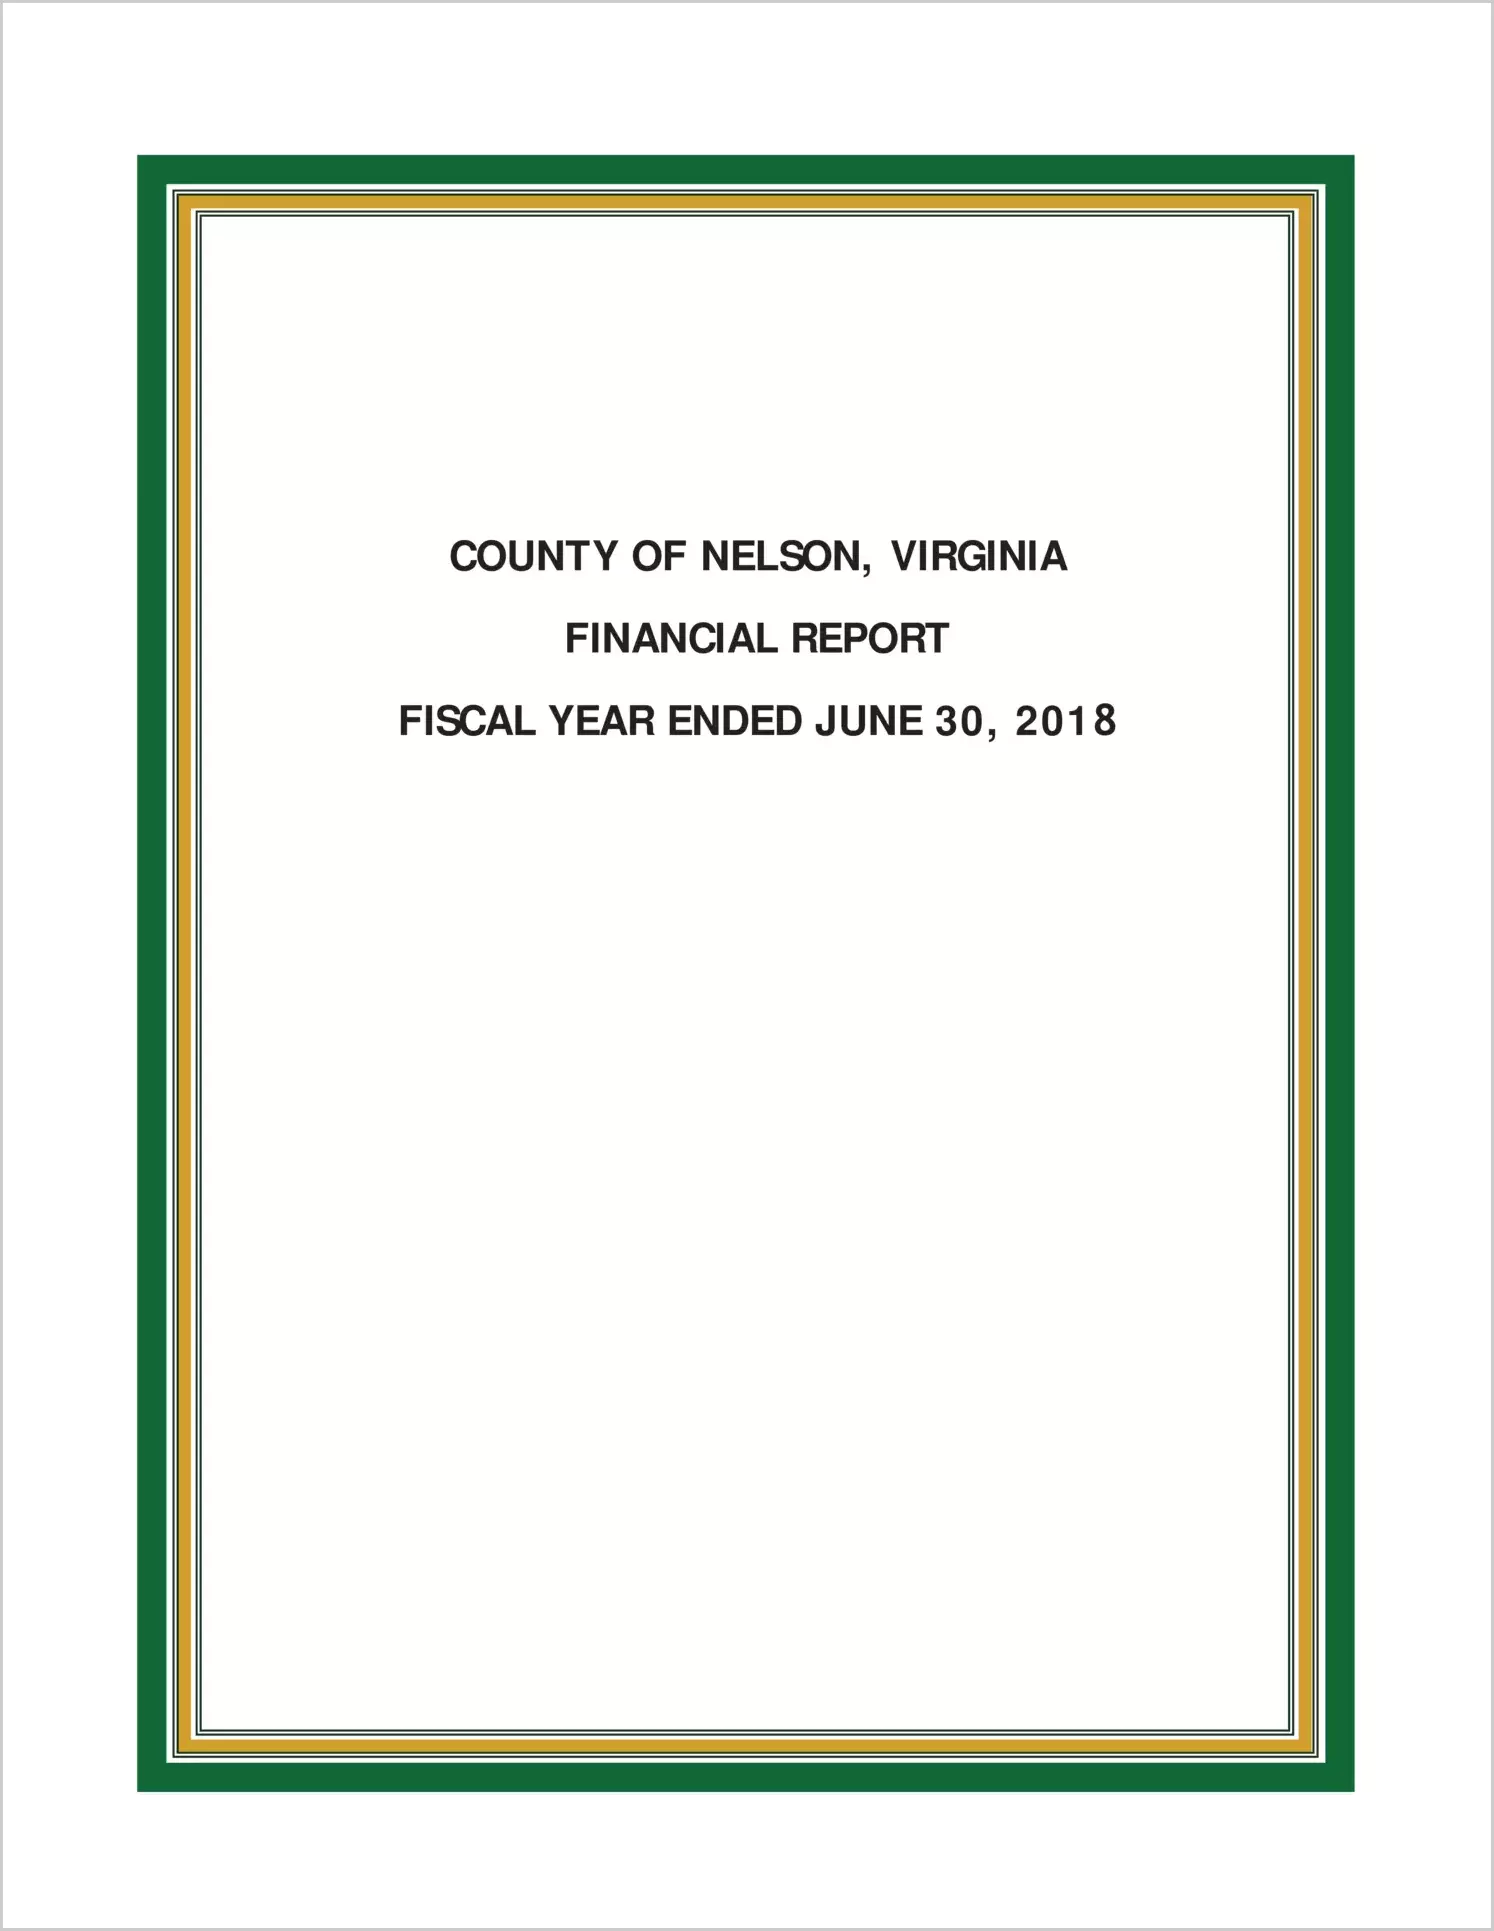 2018 Annual Financial Report for County of Nelson